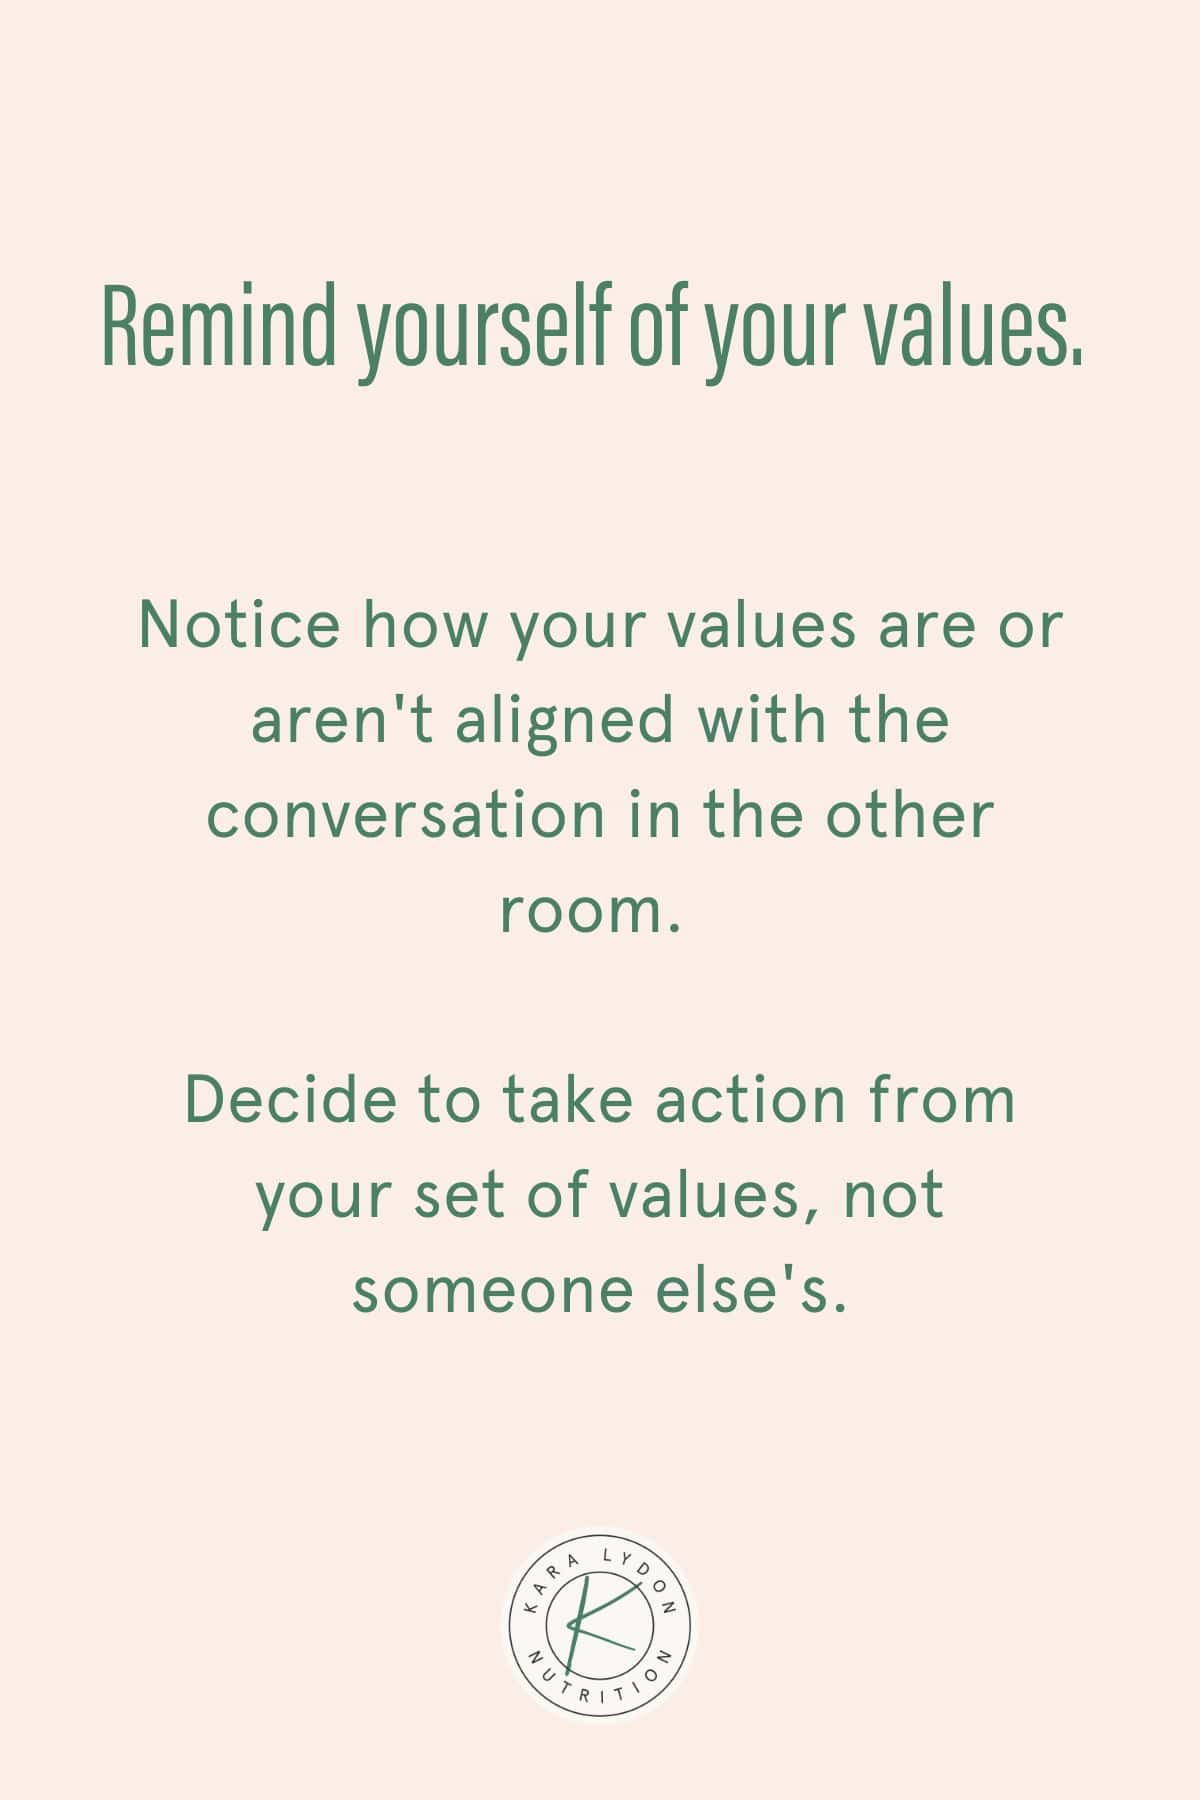 Graphic with quote: "Remind yourself of your values.  Notice how your values ​​are or aren't aligned with the conversation in the other room.  Decide to take action from your own set of values, not someone else's."